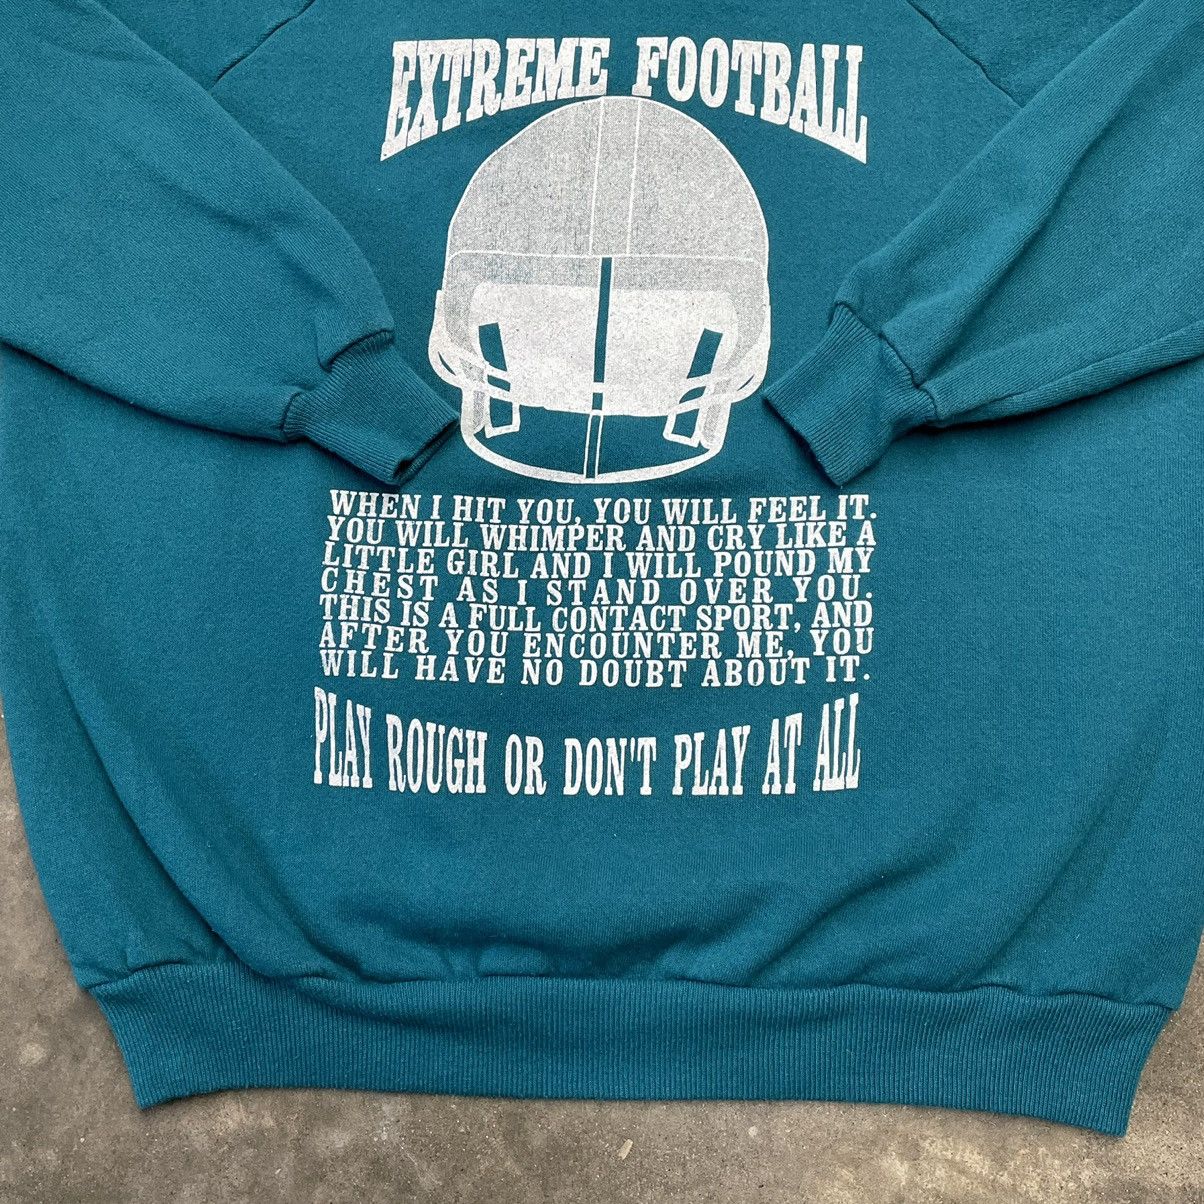 Vintage Vintage Made In USA Extreme Football Comedy Crewneck Large Size US L / EU 52-54 / 3 - 3 Thumbnail